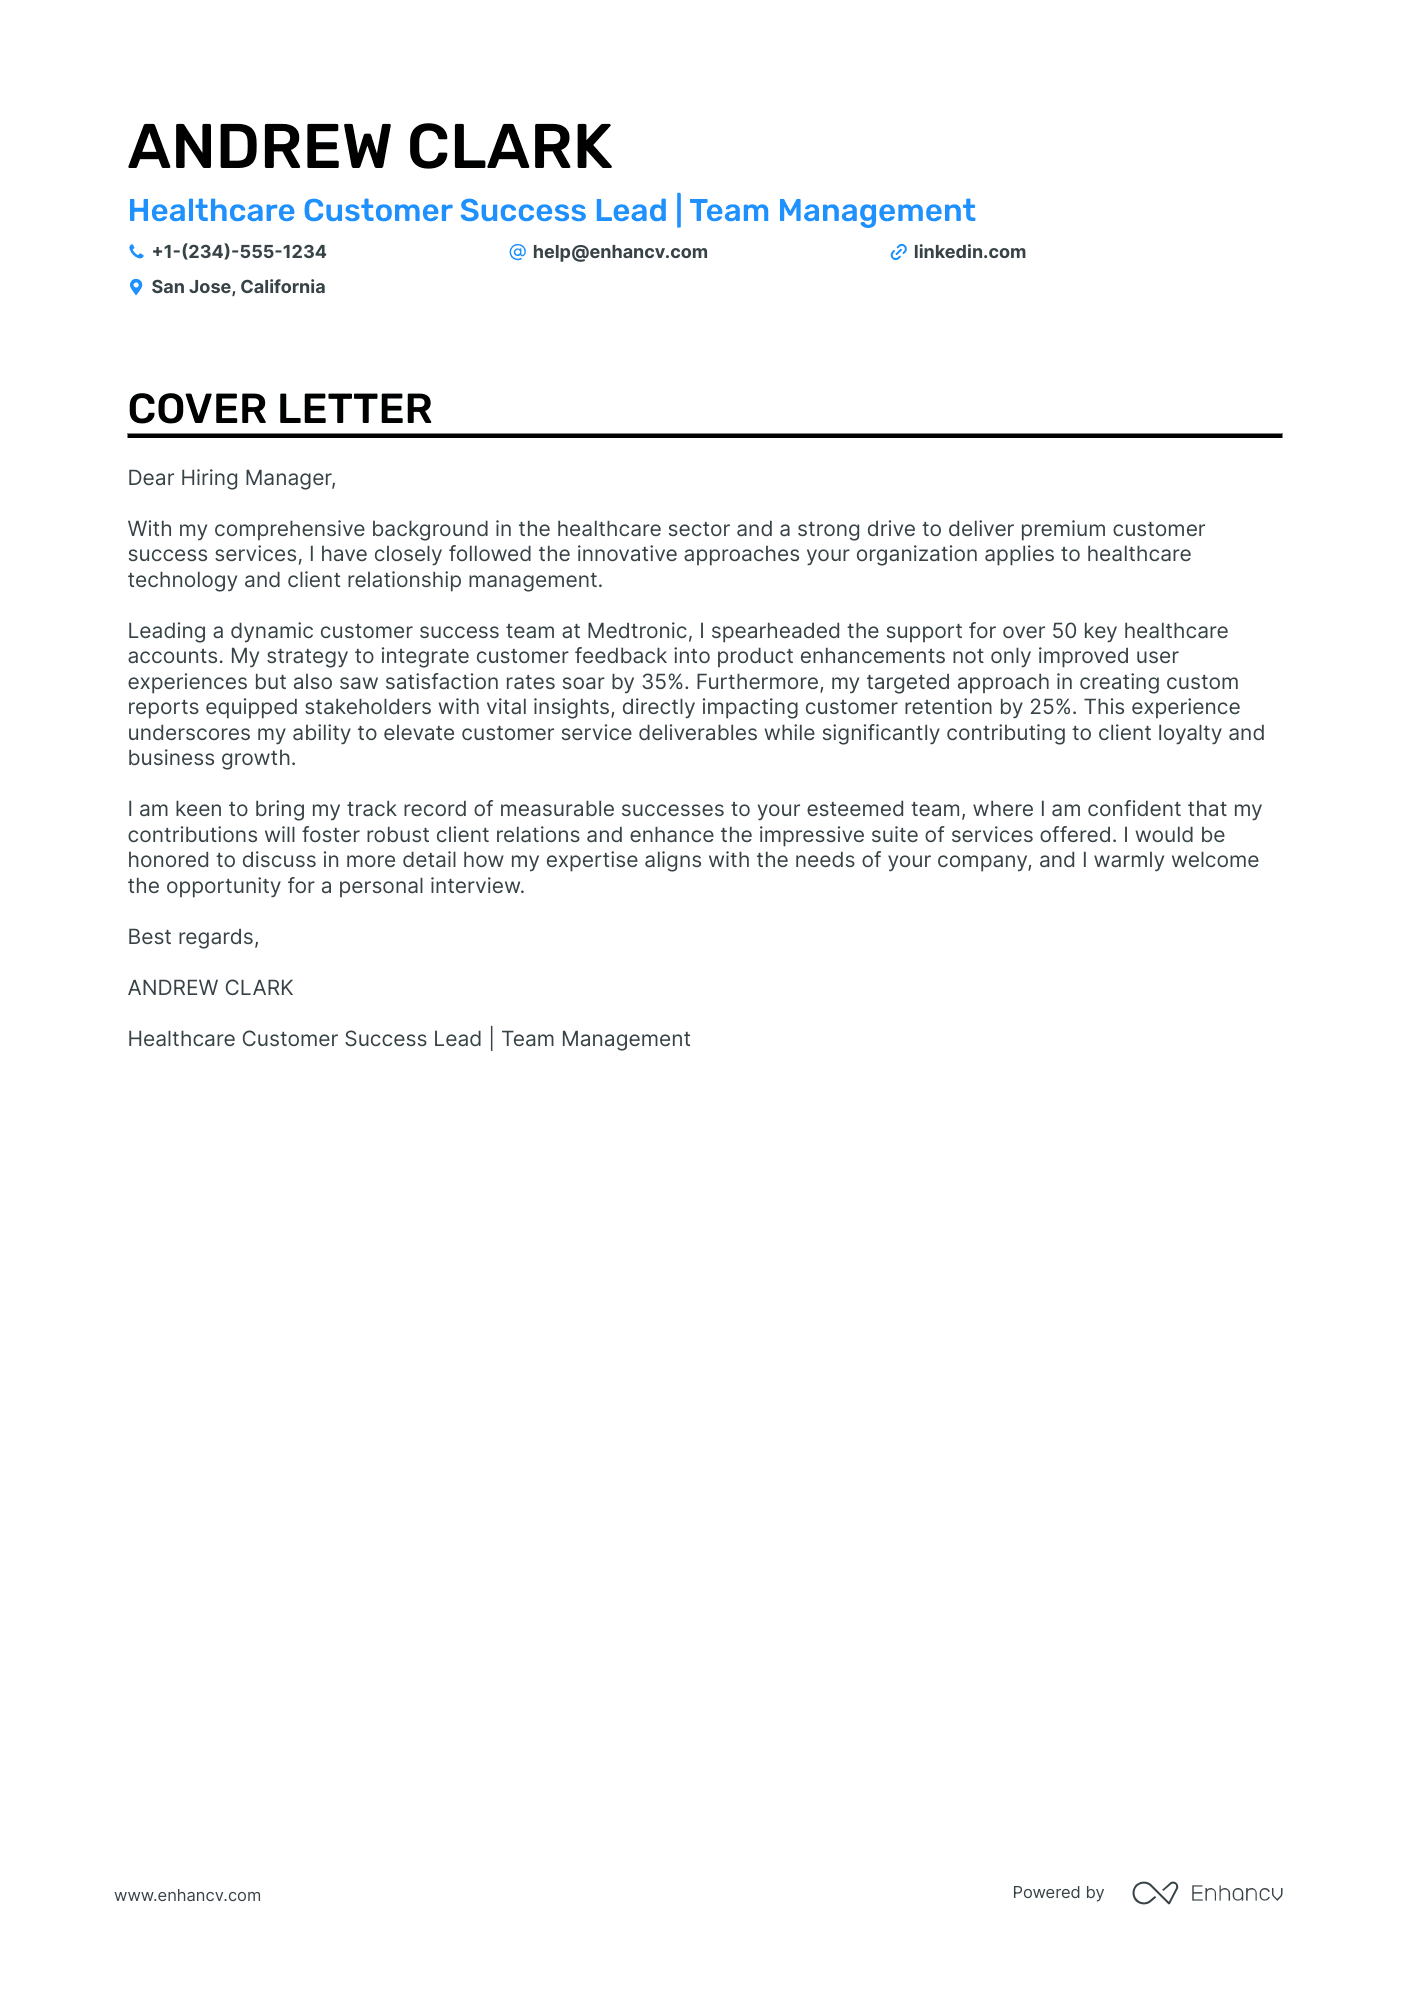 Director of Customer Success cover letter